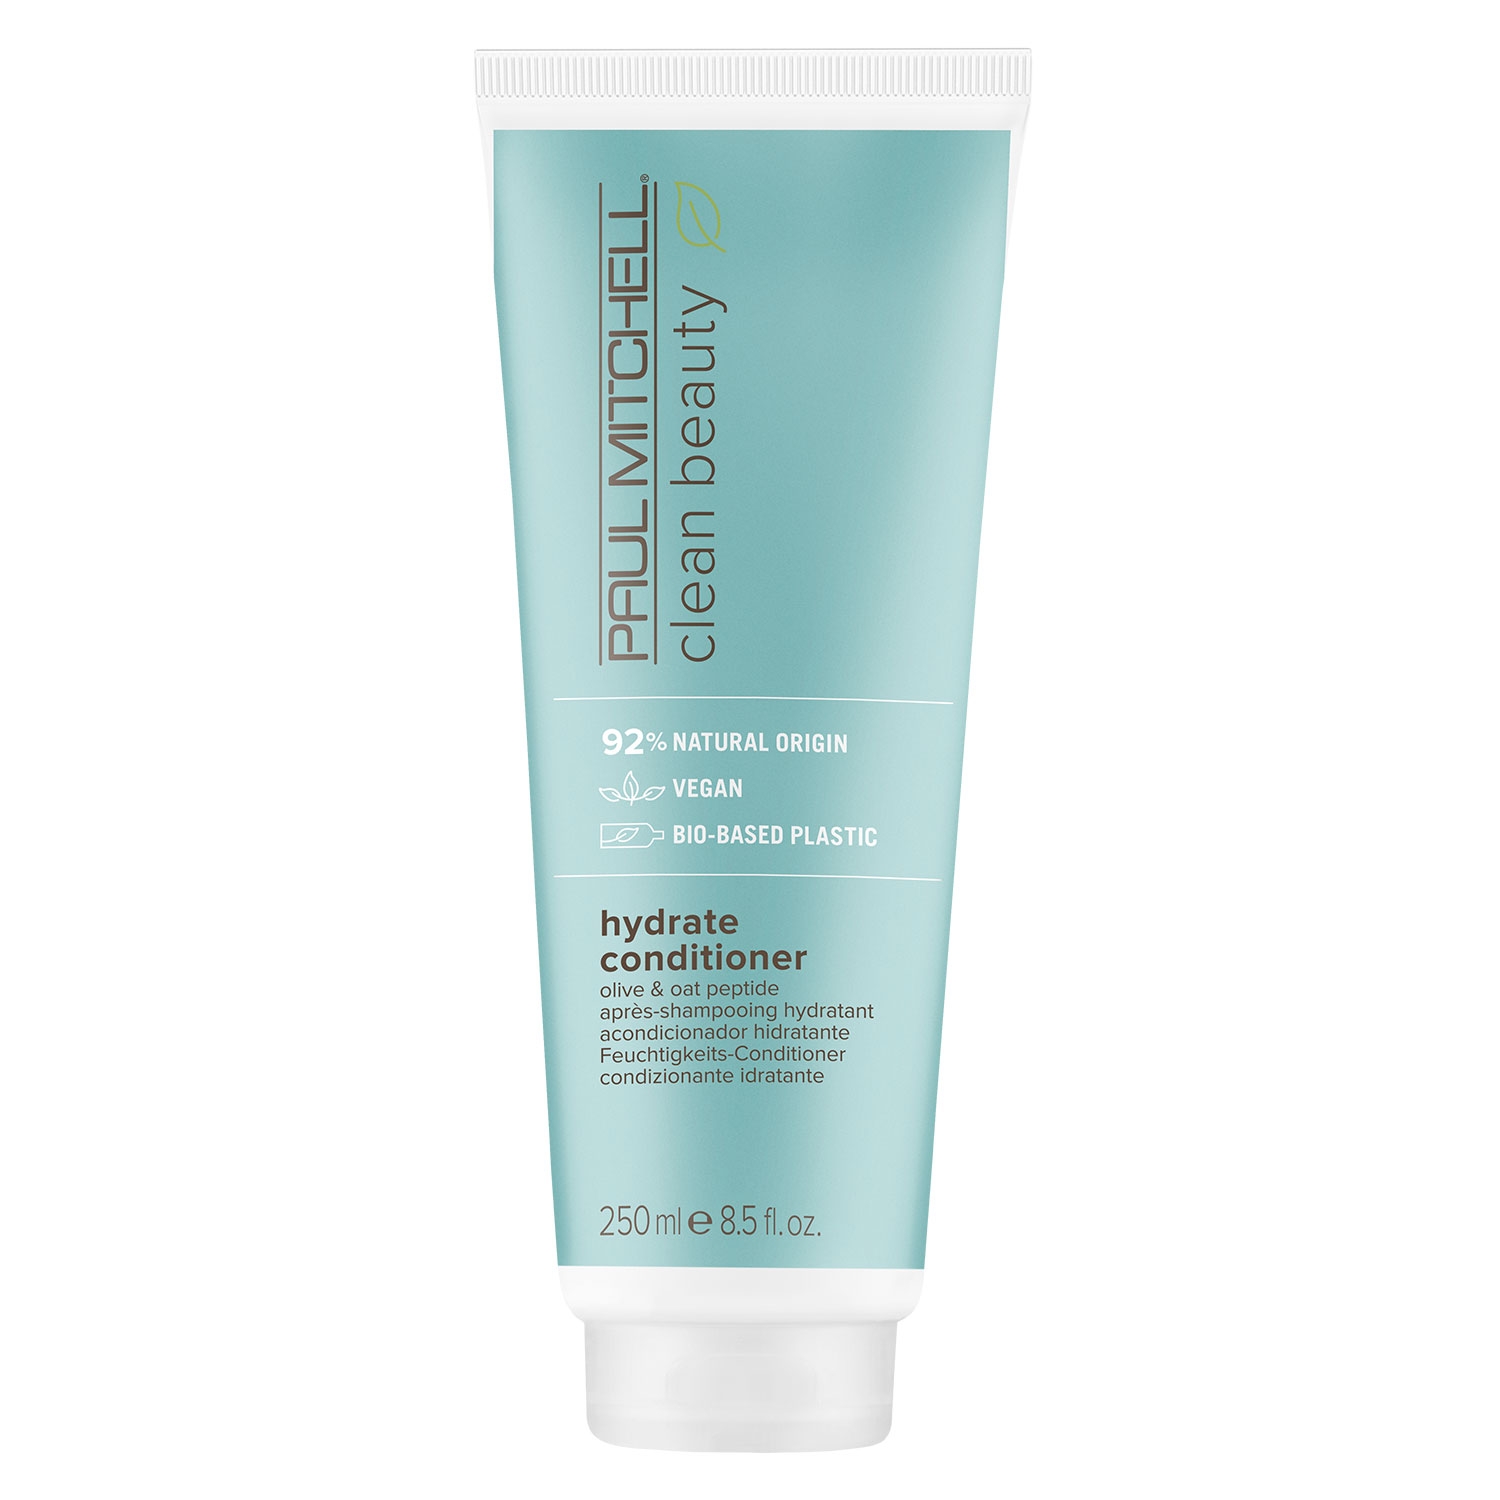 Product image from Paul Mitchell Clean Beauty - Hydrate Conditioner